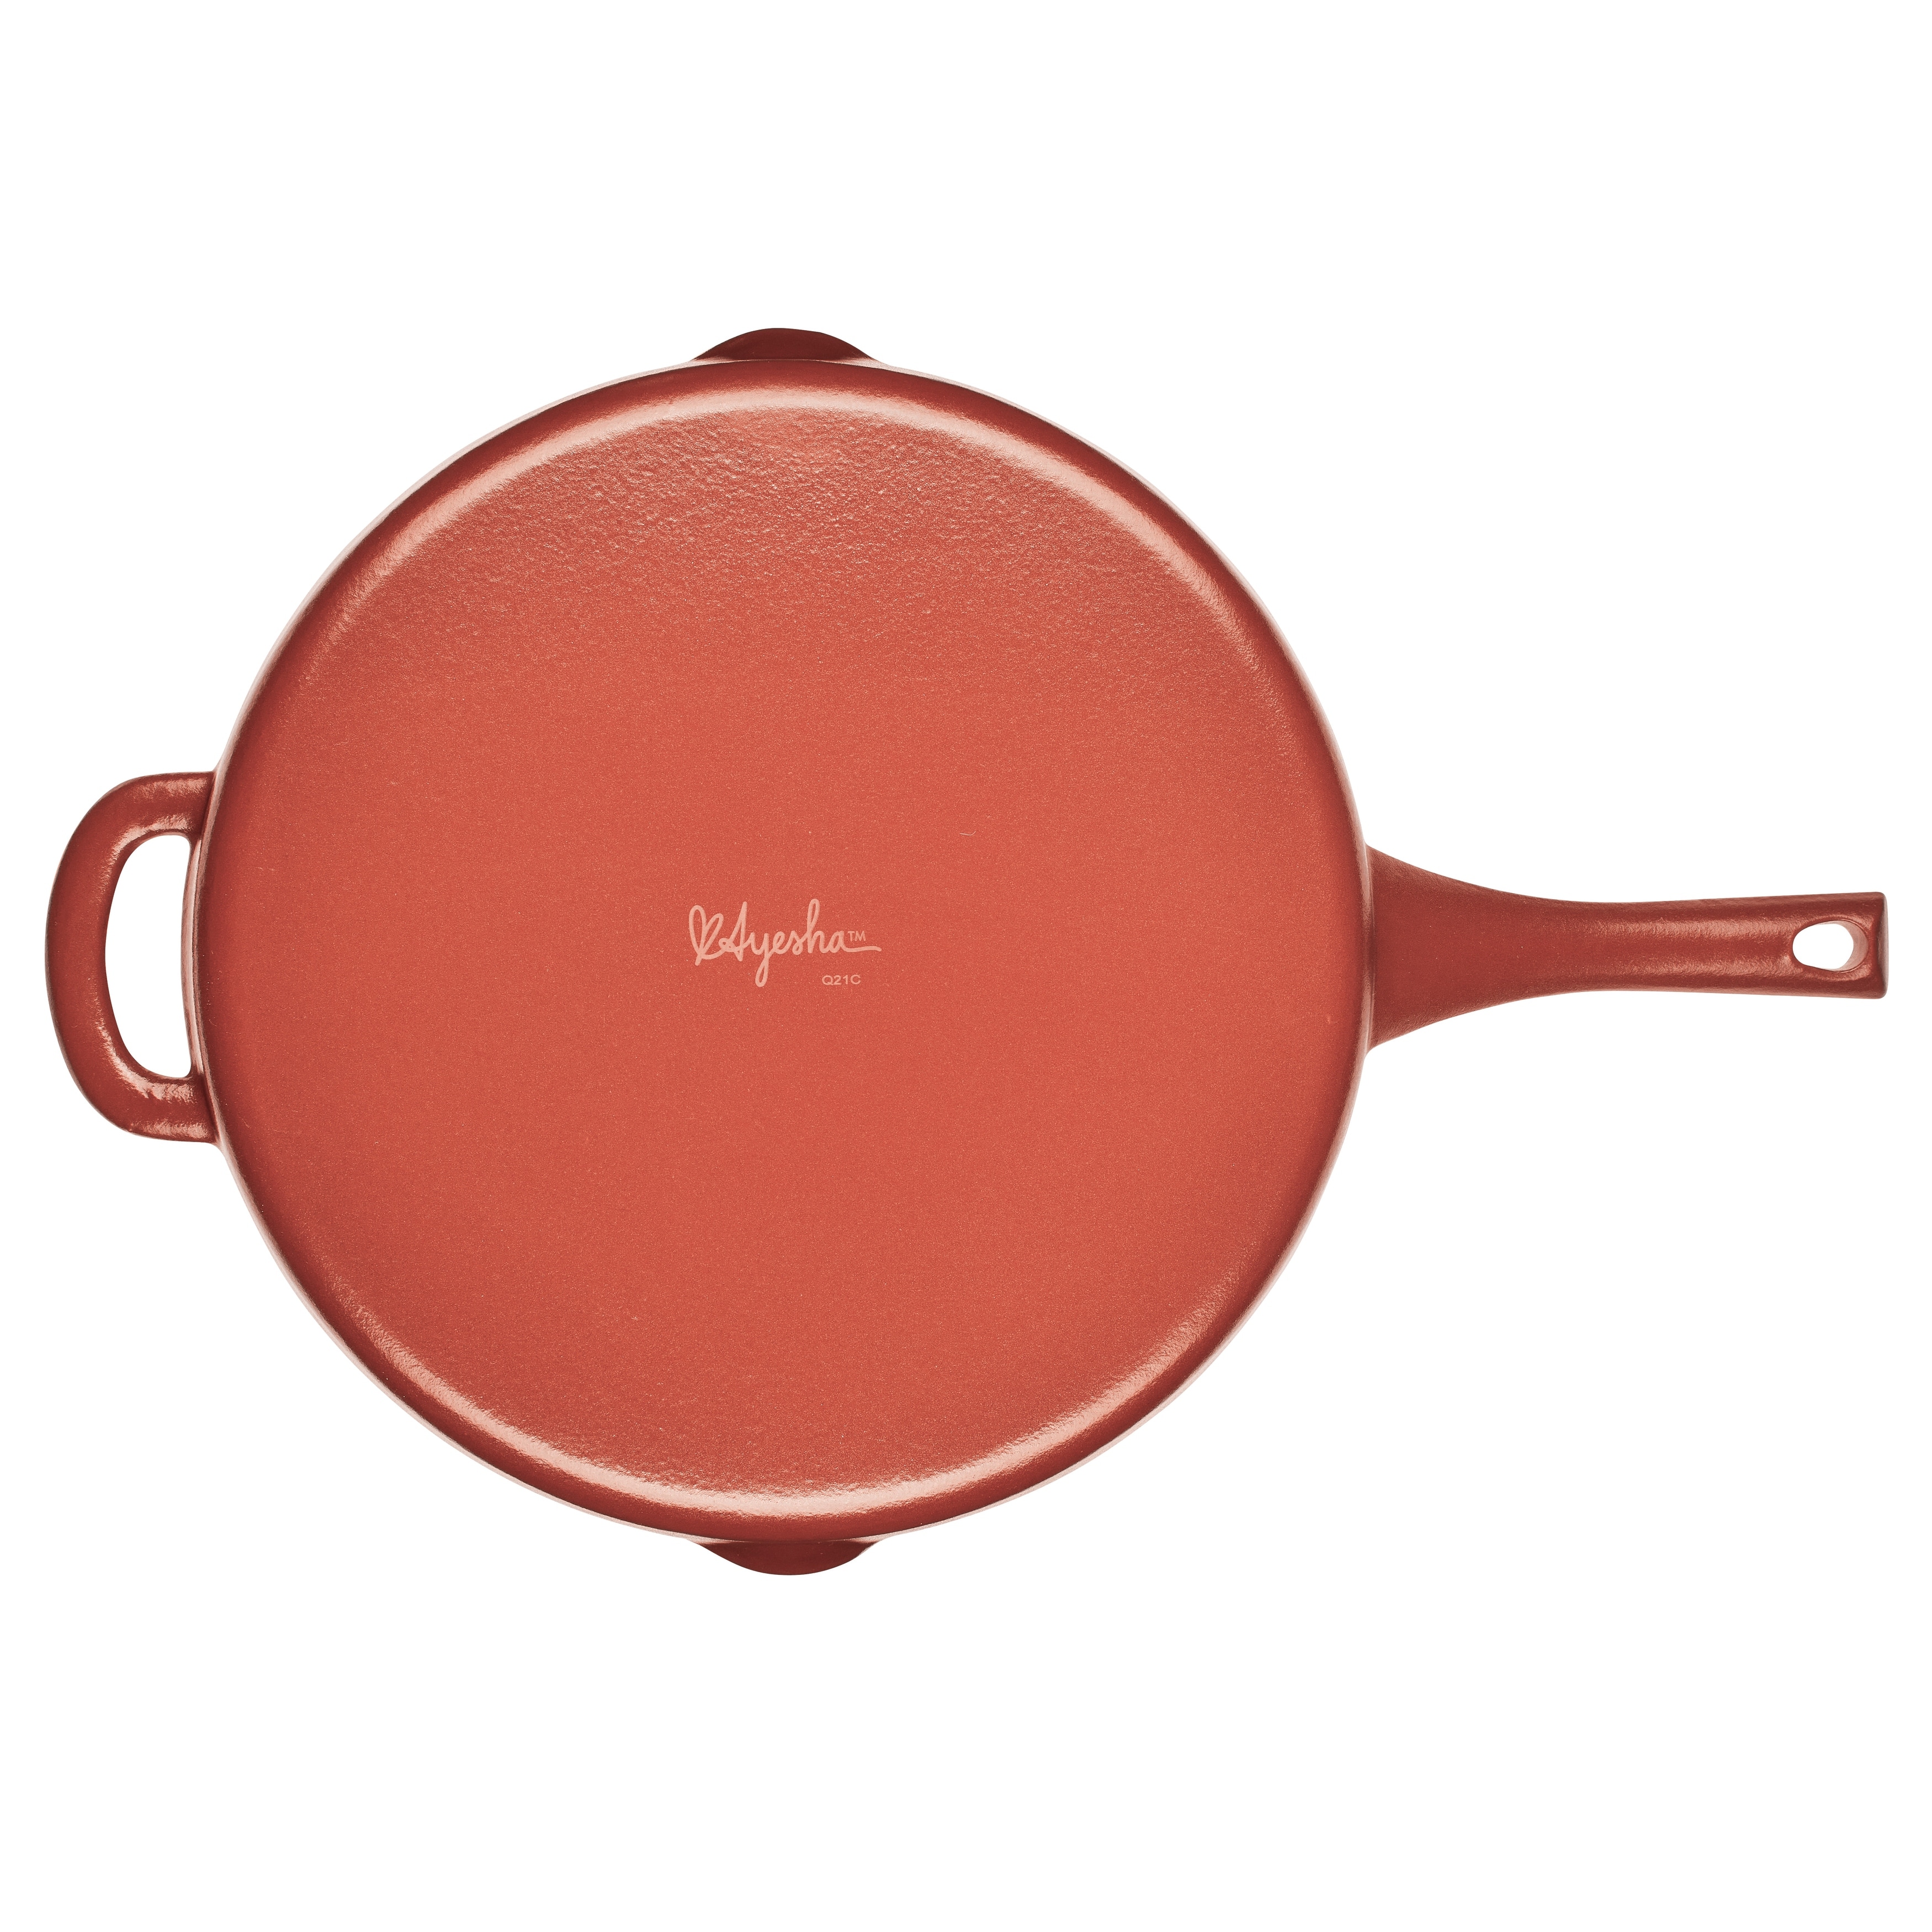 https://ak1.ostkcdn.com/images/products/is/images/direct/69b32c9ffdecb04c28c0f6628c0bb626c53ba536/Ayesha-Curry-Enameled-Cast-Iron-Induction-Skillet-with-Helper-Handle-and-Pour-Spouts%2C-12-Inch%2C-Anchor-Blue.jpg